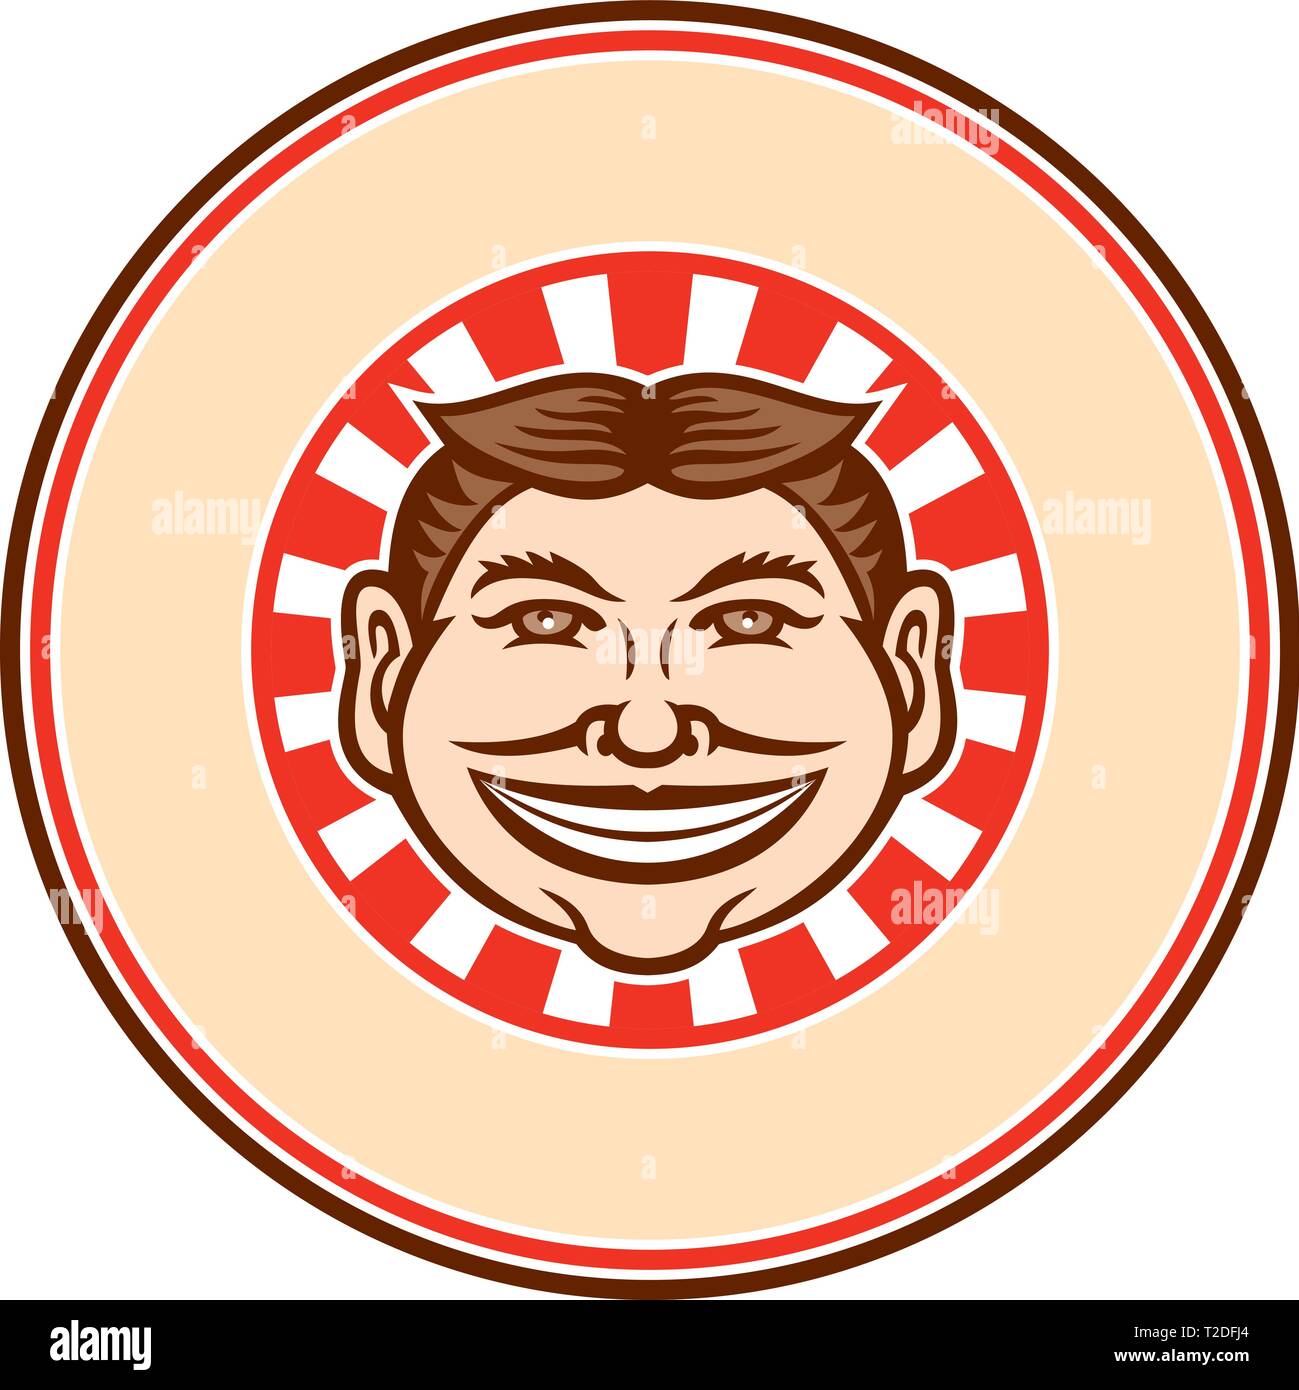 Mascot icon illustration of head of a grinning, leering, smiling funny face slyly beaming mug with hair parted in middle viewed from front. Stock Vector